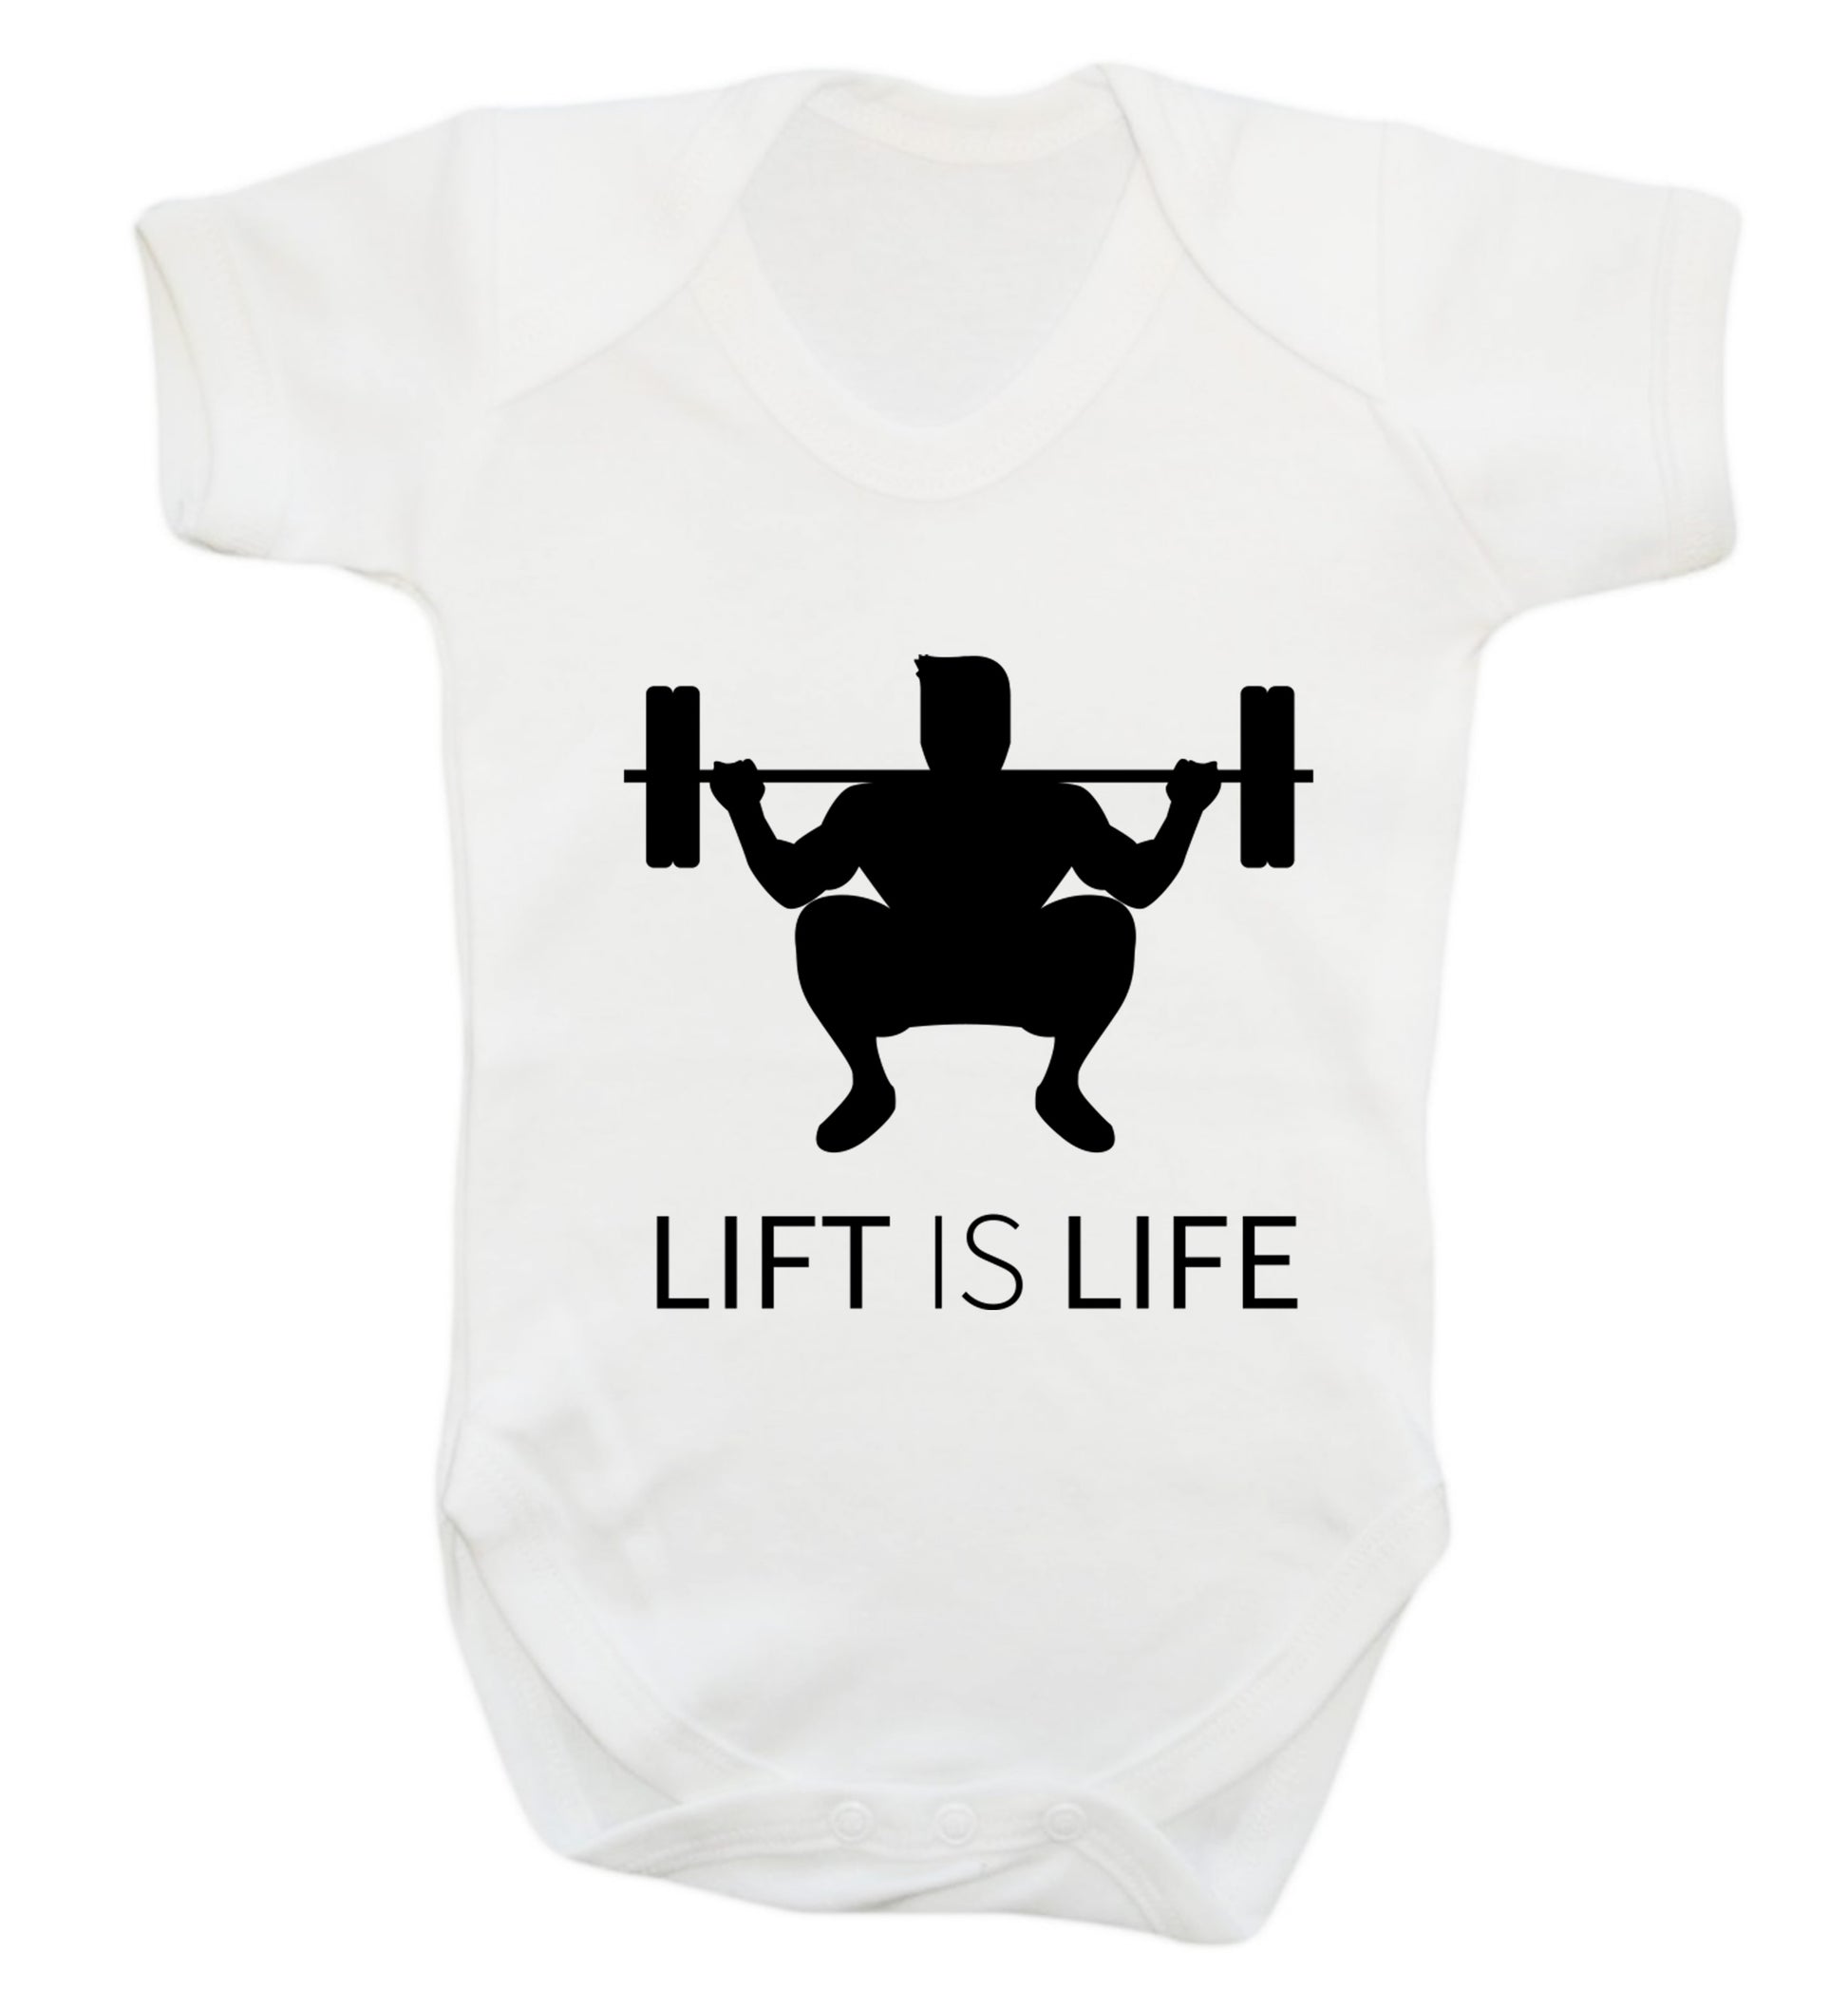 Lift is life Baby Vest white 18-24 months